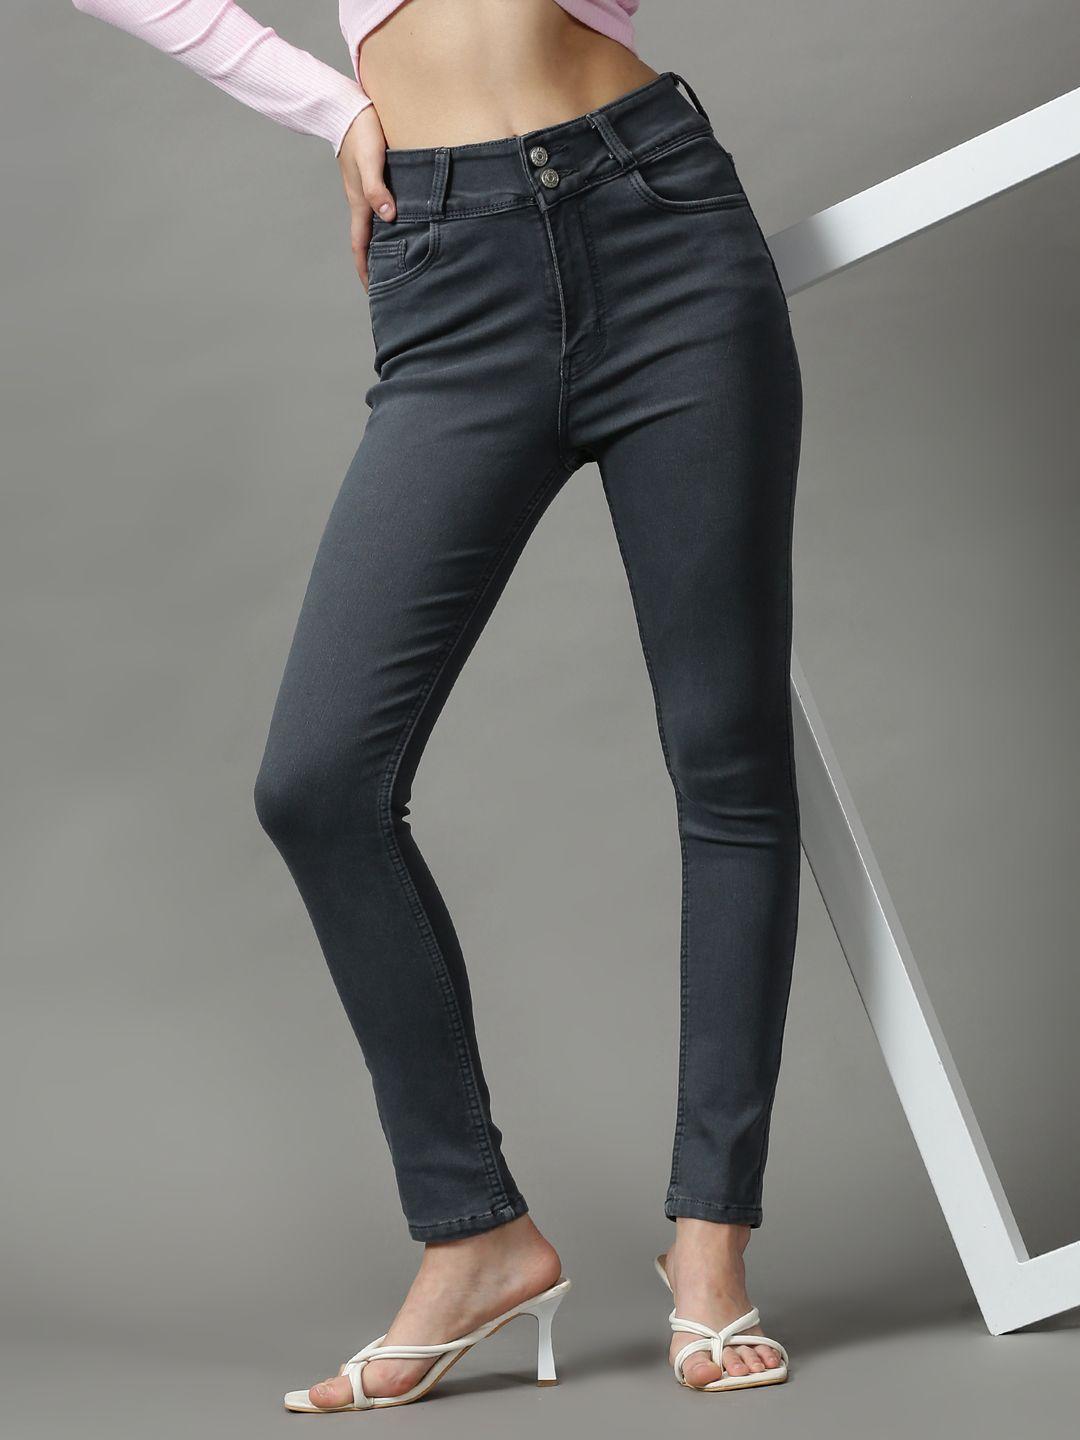 showoff-women-grey-skinny-fit-stretchable-jeans